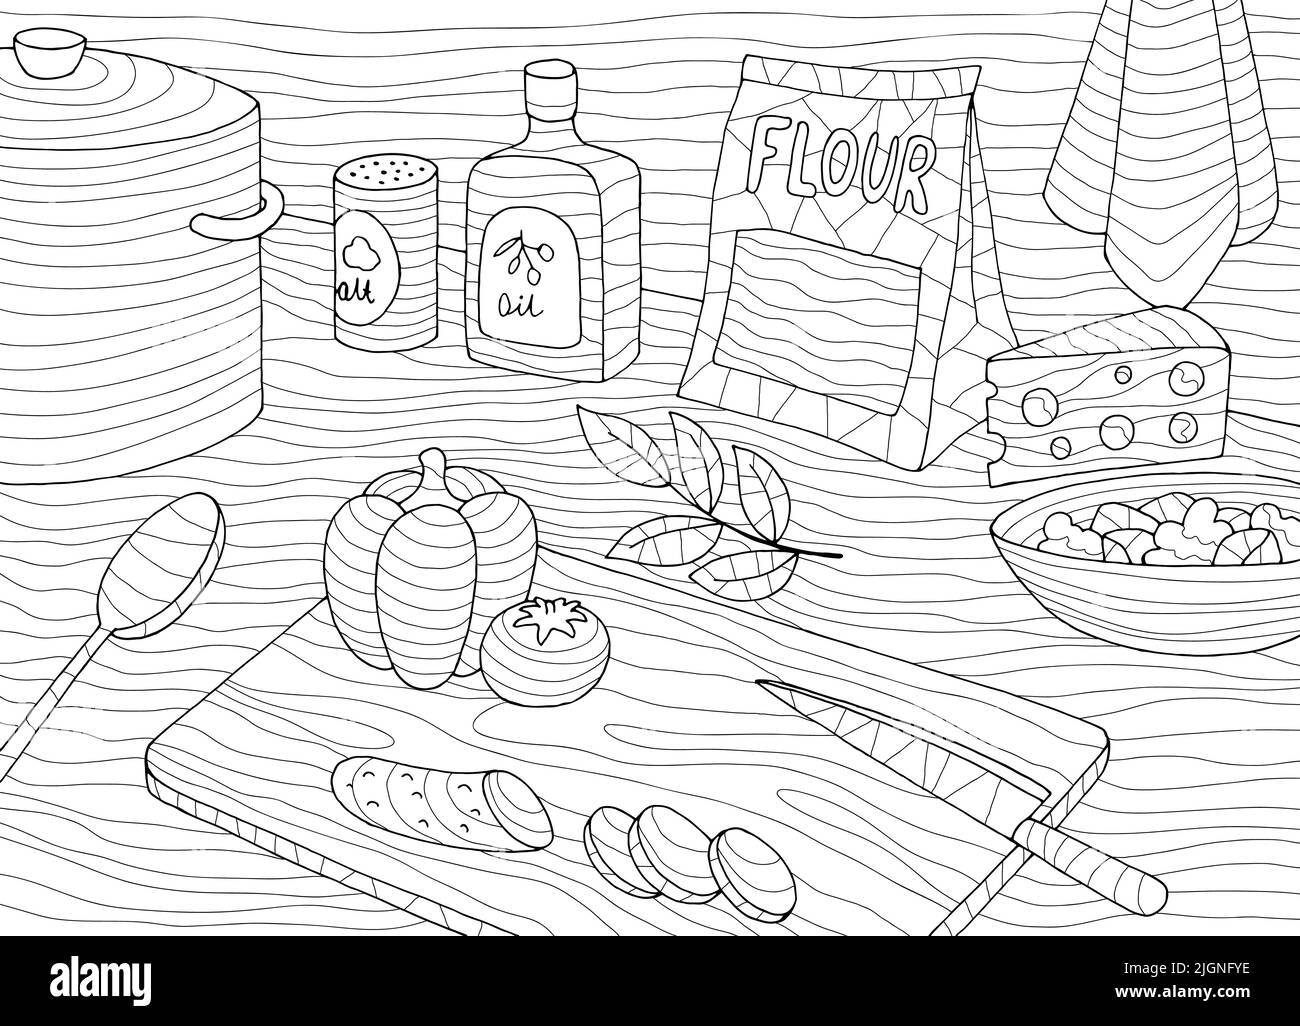 Cooking coloring food graphic black white sketch illustration vector Stock Vector